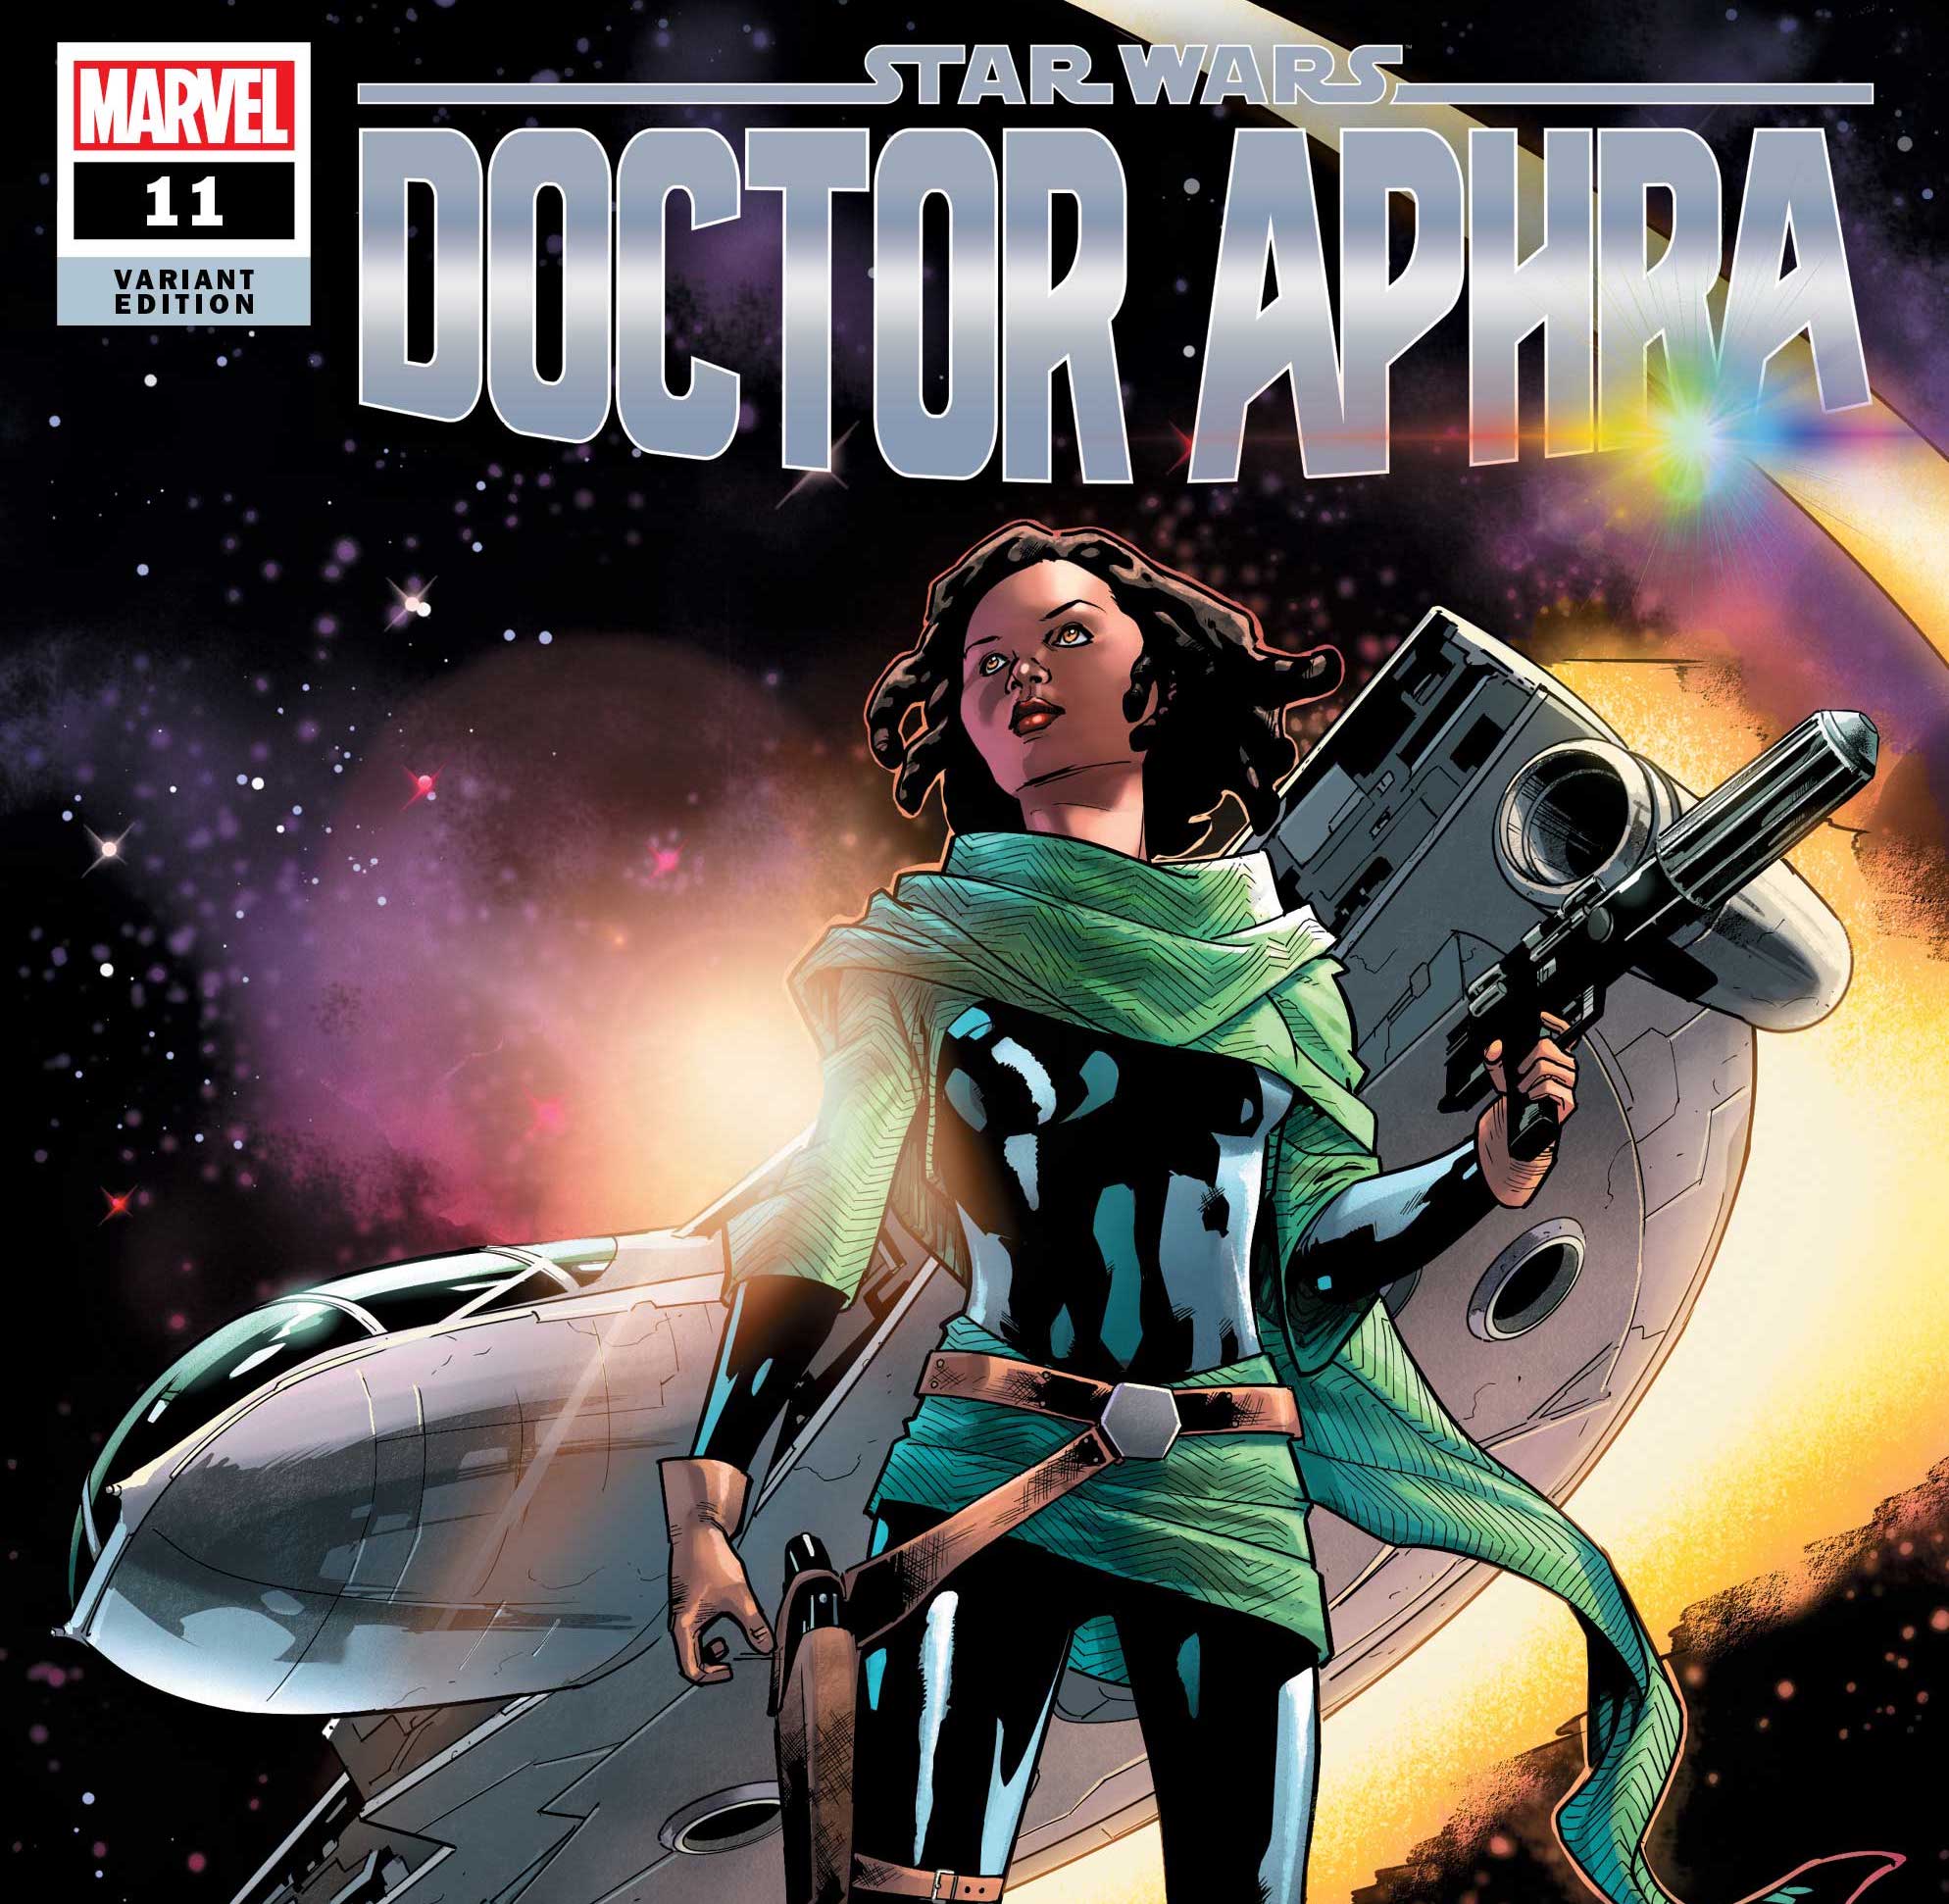 Marvel Comics celebrating Pride Month with Star Wars variant covers